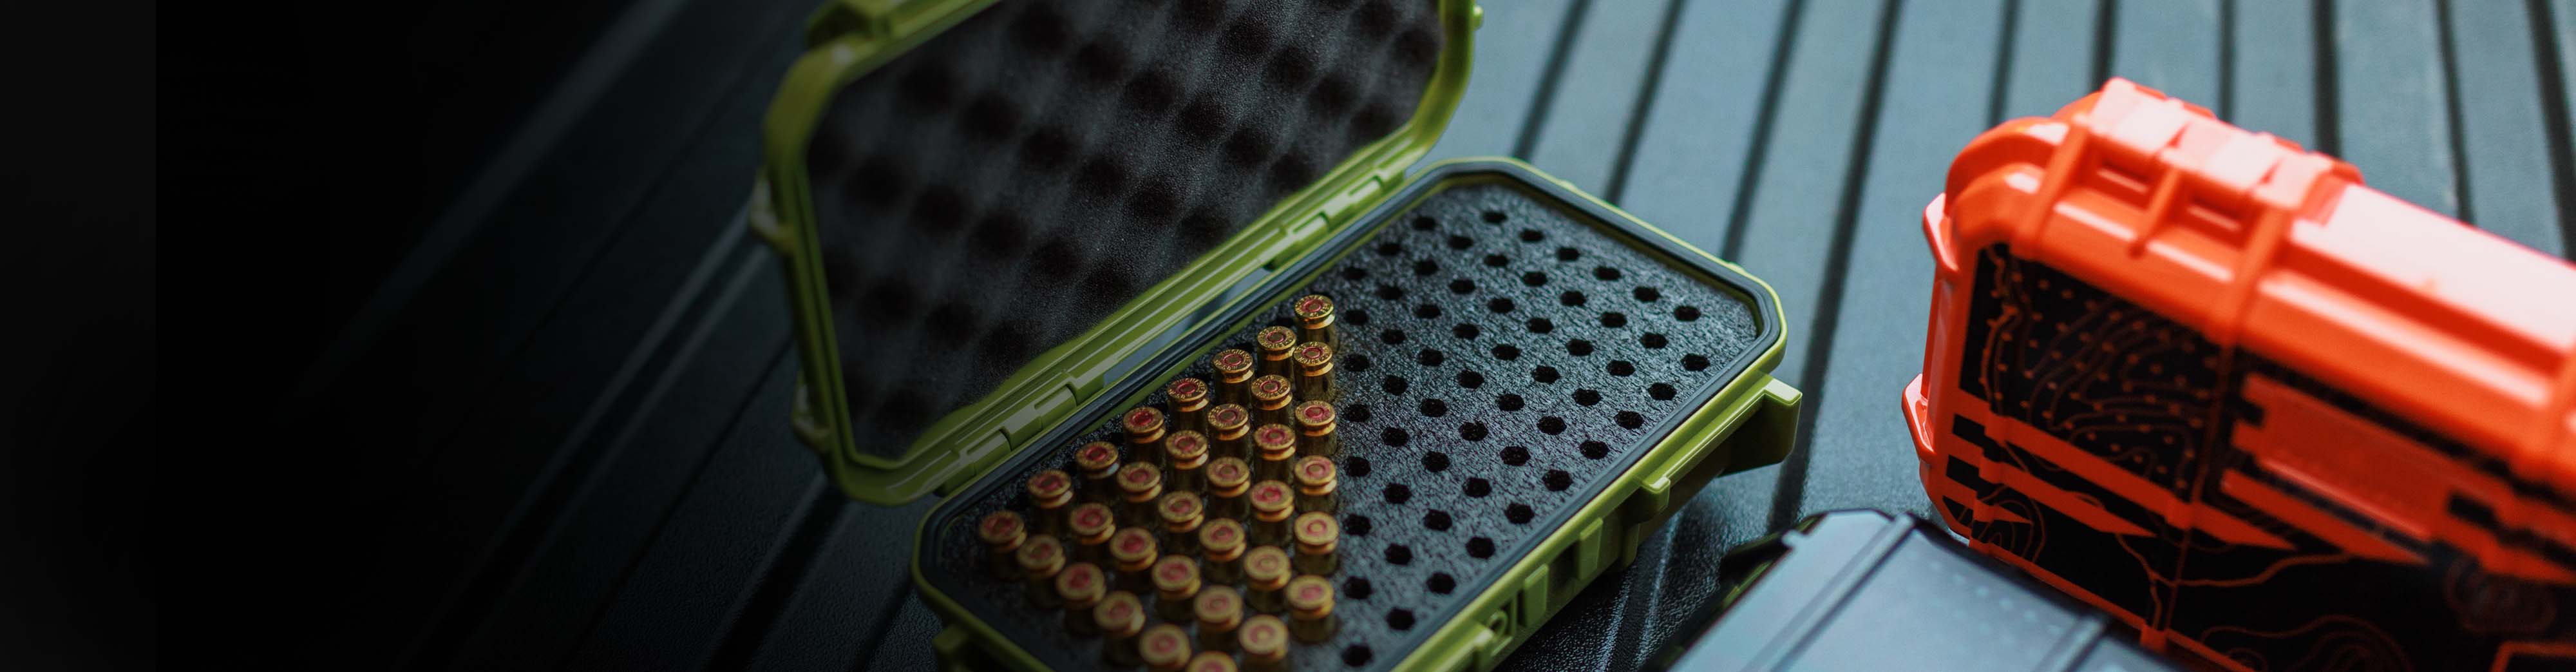 Ammo_Collection_Banner2.jpg